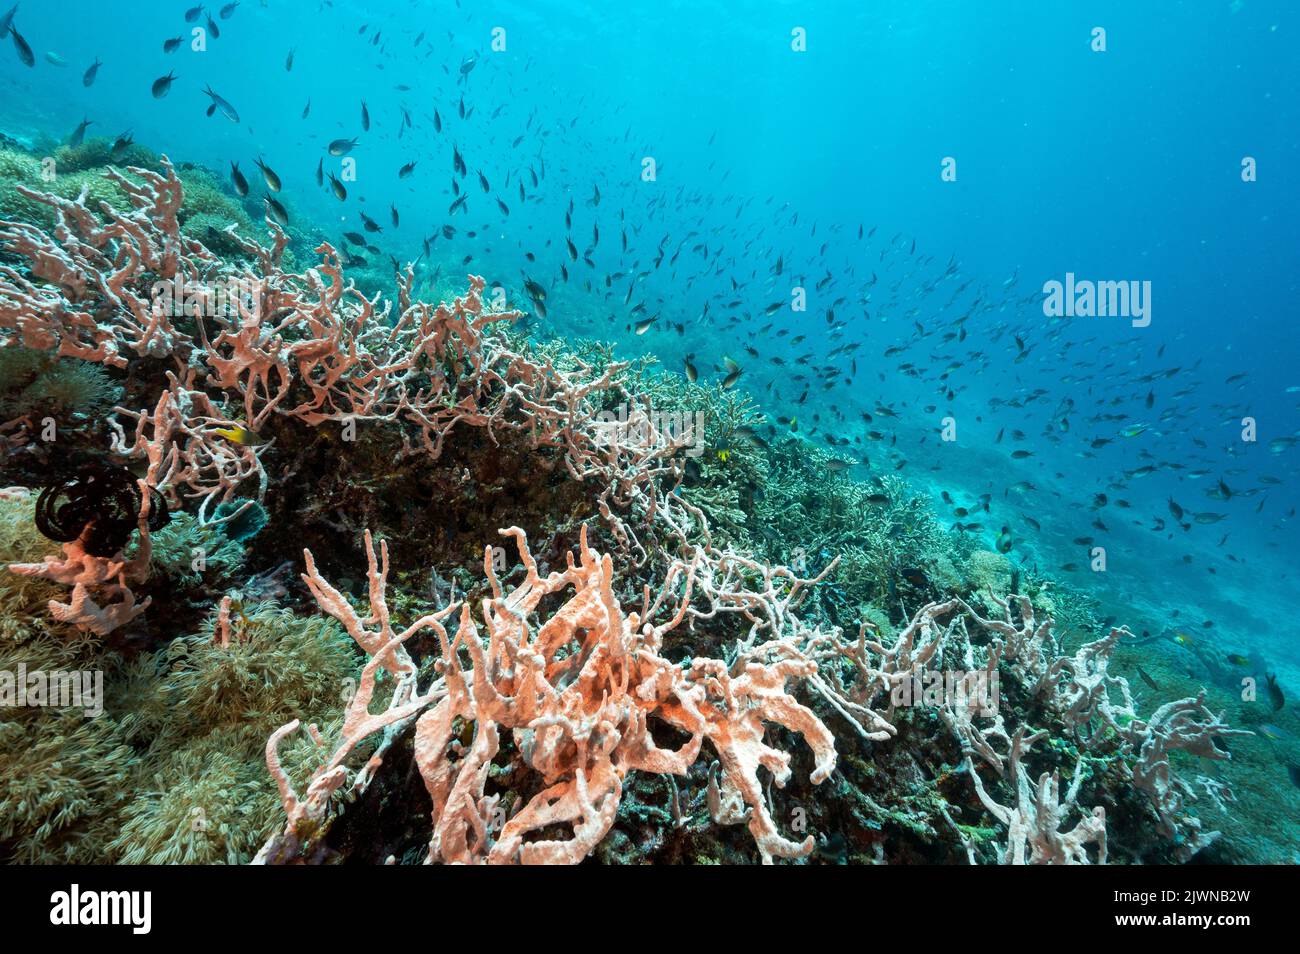 Reef scenic with sponges and staghorn corals Raja Ampat Indonesia. Stock Photo